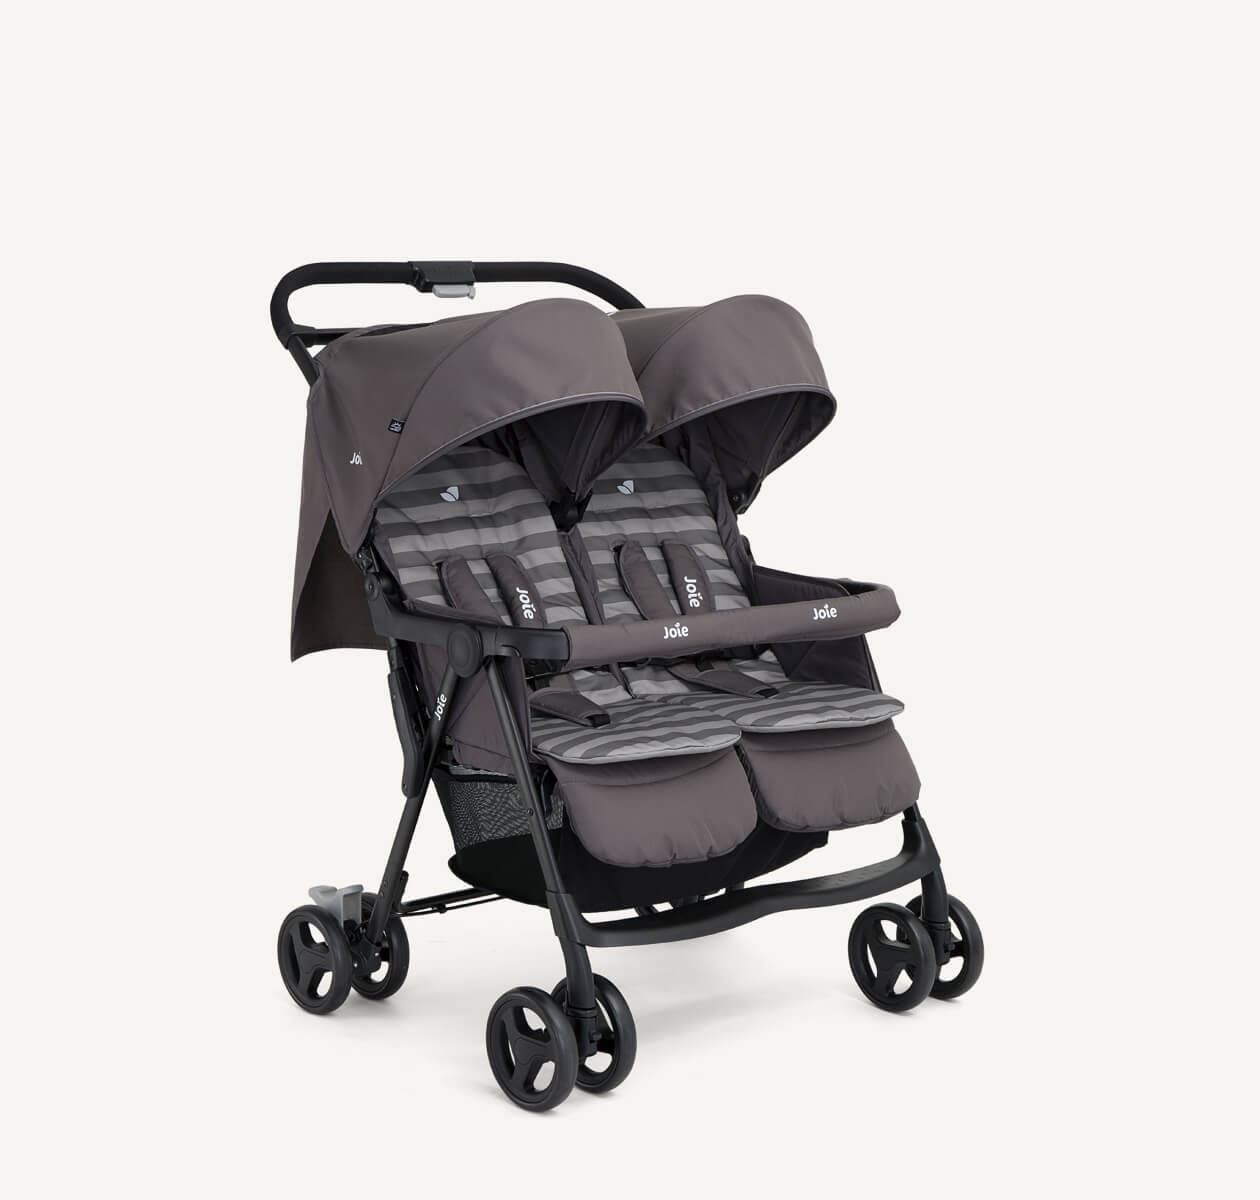  The Joie Aire Twin side-by-side double stroller in dark gray with two tone striped seat inserts, at an angle.